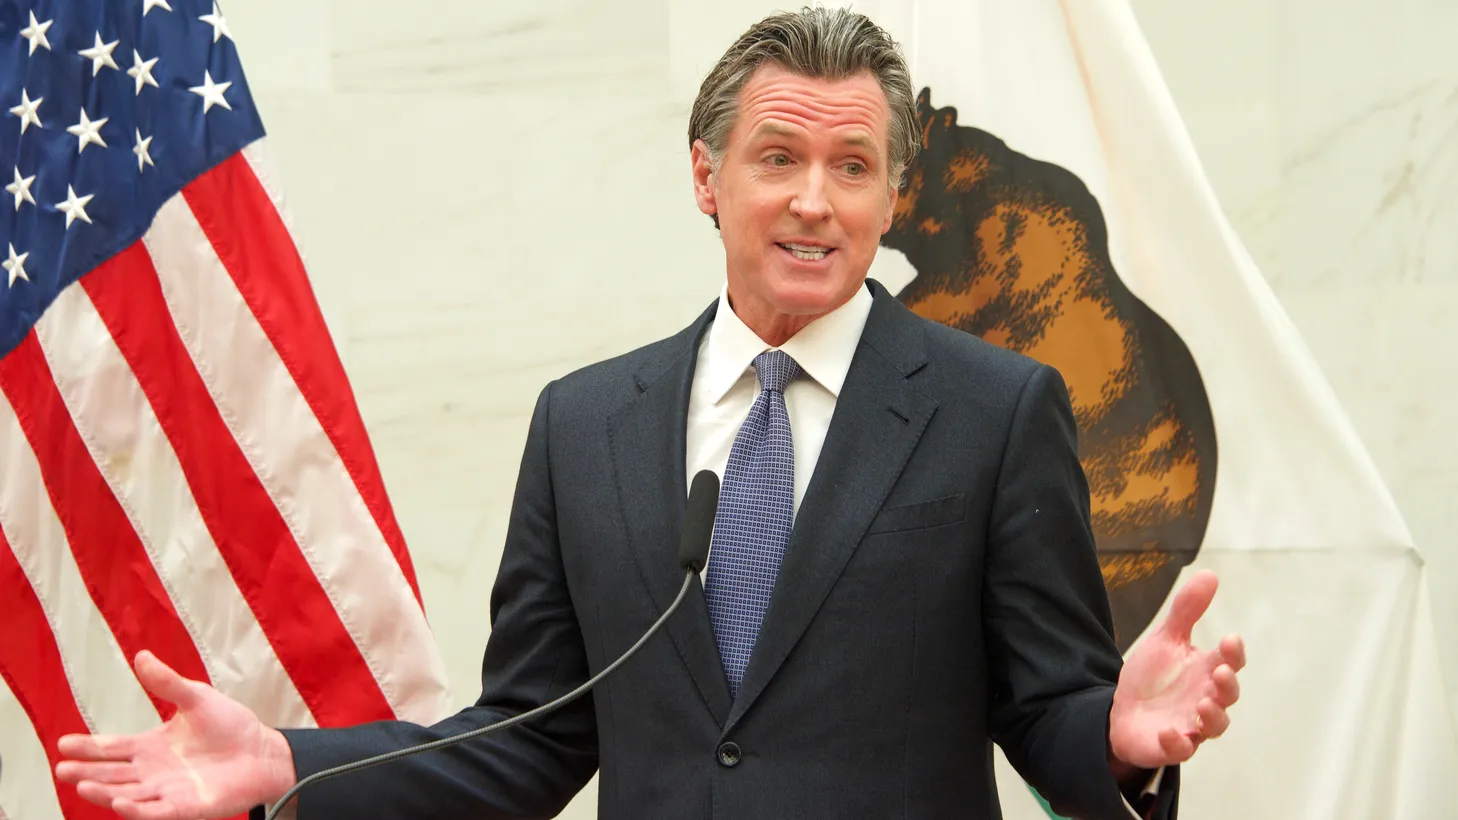 Gov. Gavin Newsom calls California a bastion of freedom, carrying on a legacy of soaring rhetoric established by his predecessors, Jerry Brown and Arnold Schwarzenegger.